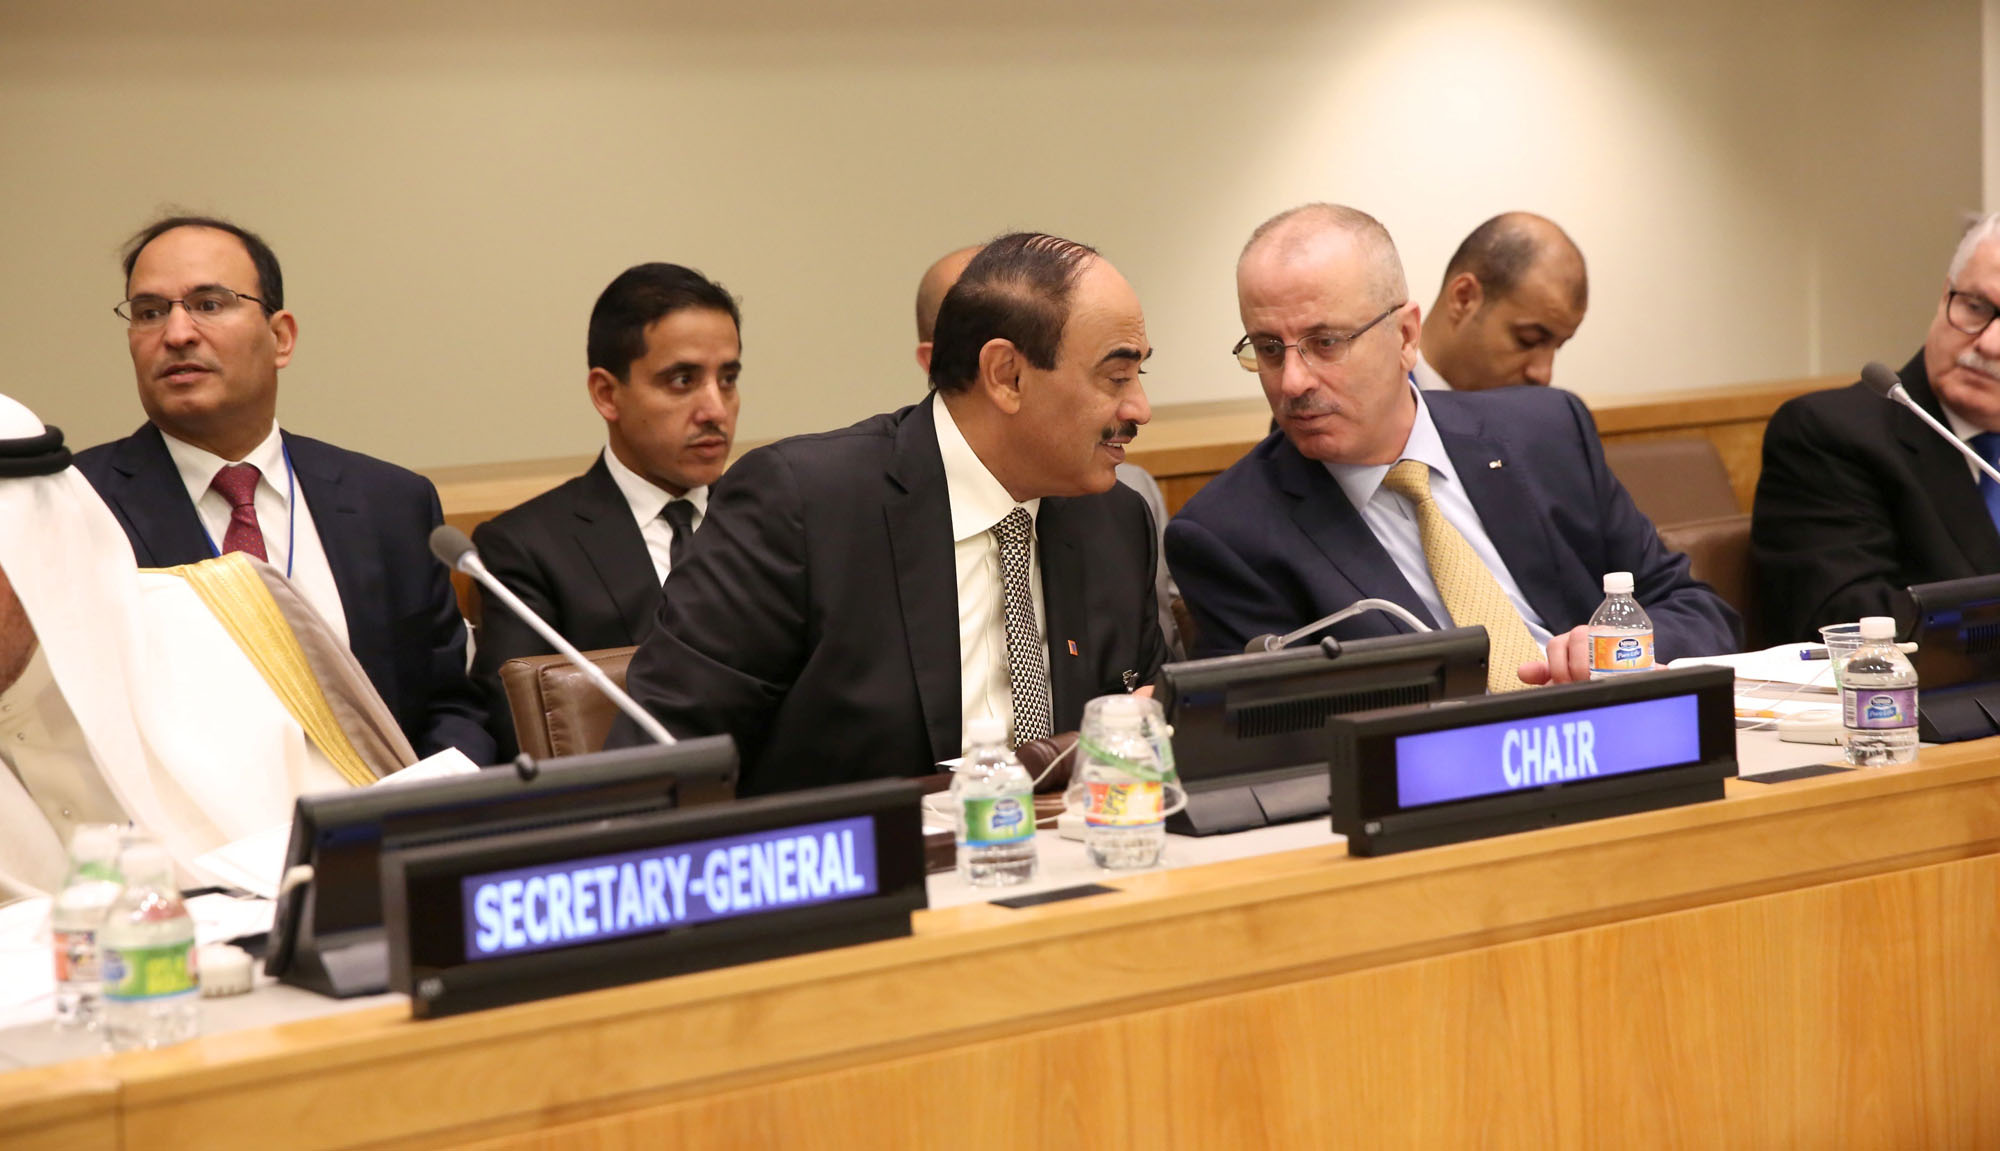 First Deputy Premier and Foreign Minister Sheikh Sabah Khaled Al-Hamad Al-Sabah during a ministerial meeting of the Organization of Islamic Cooperation (OIC)